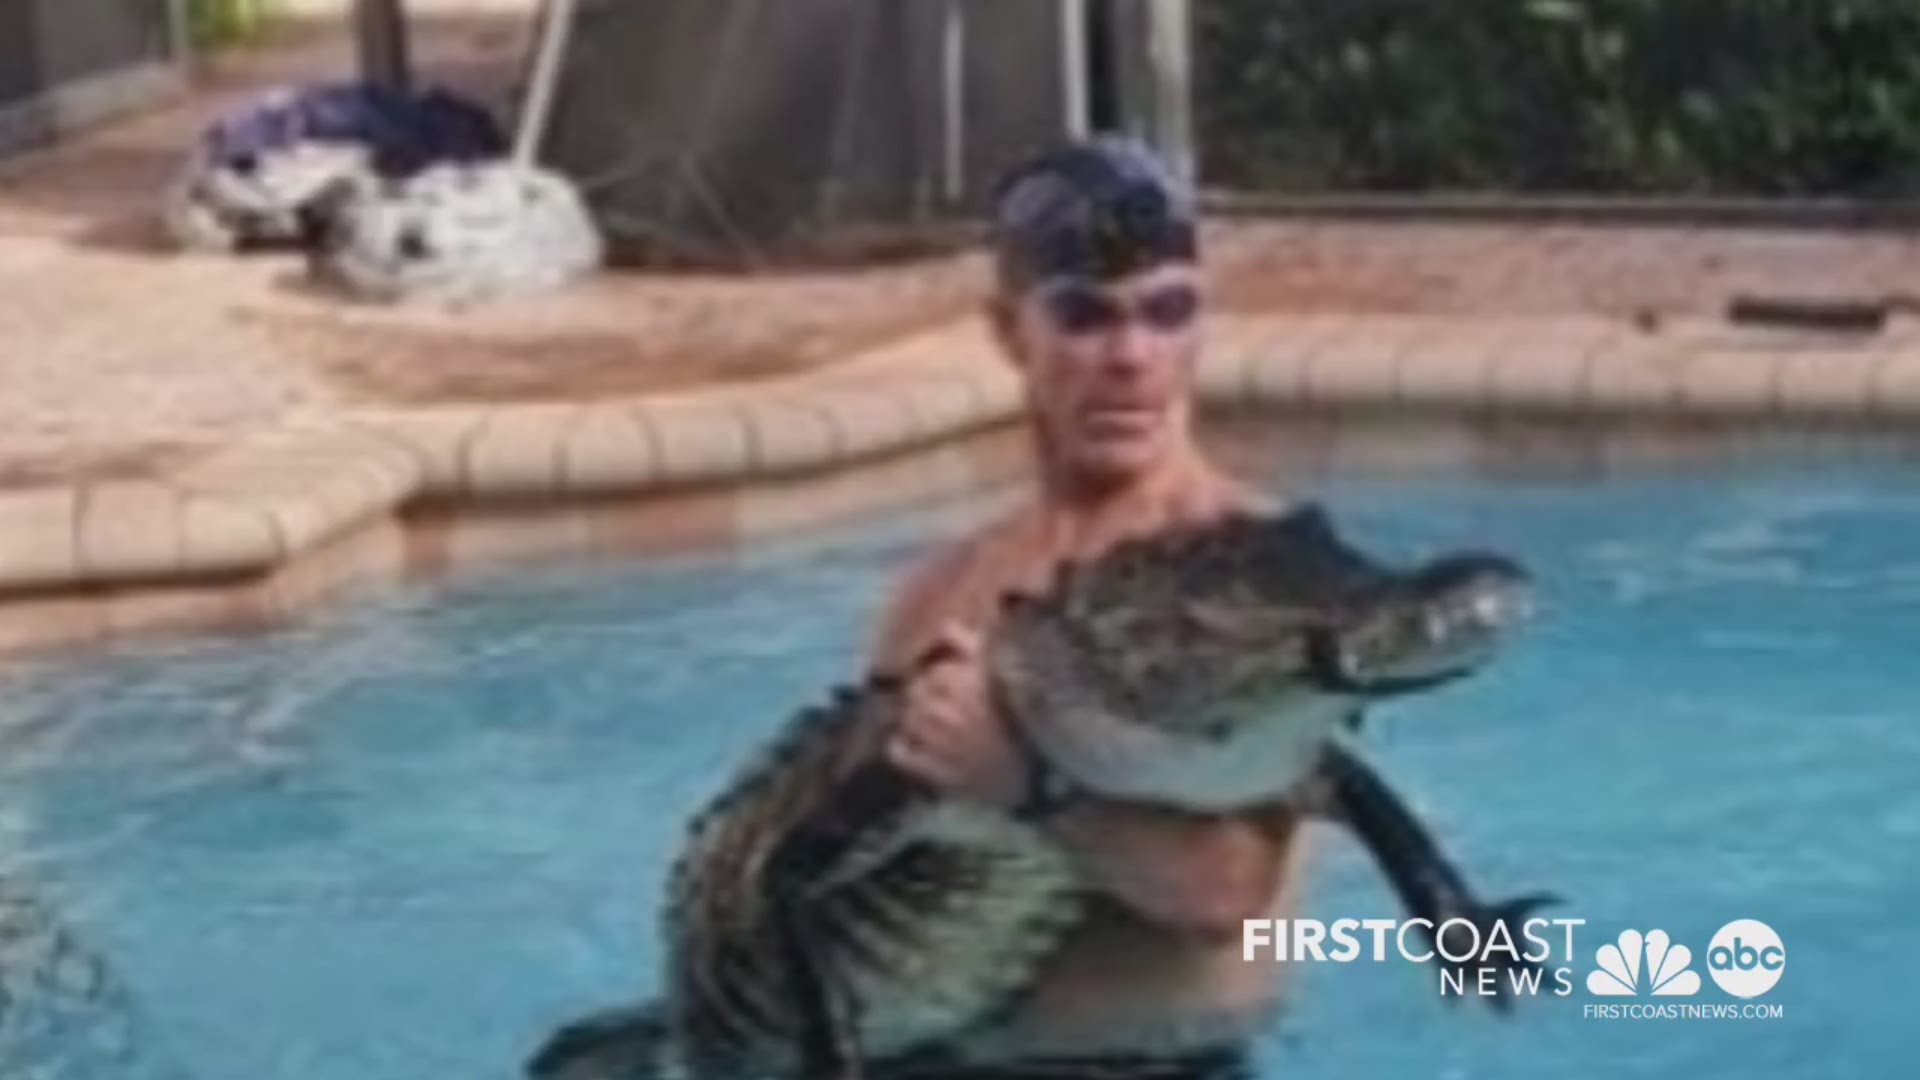 Paul Bedard shared pictures of a nearly 9-foot alligator he caught Tuesday in a pool in Parkland. He said he "played around" with it first to tire it out.